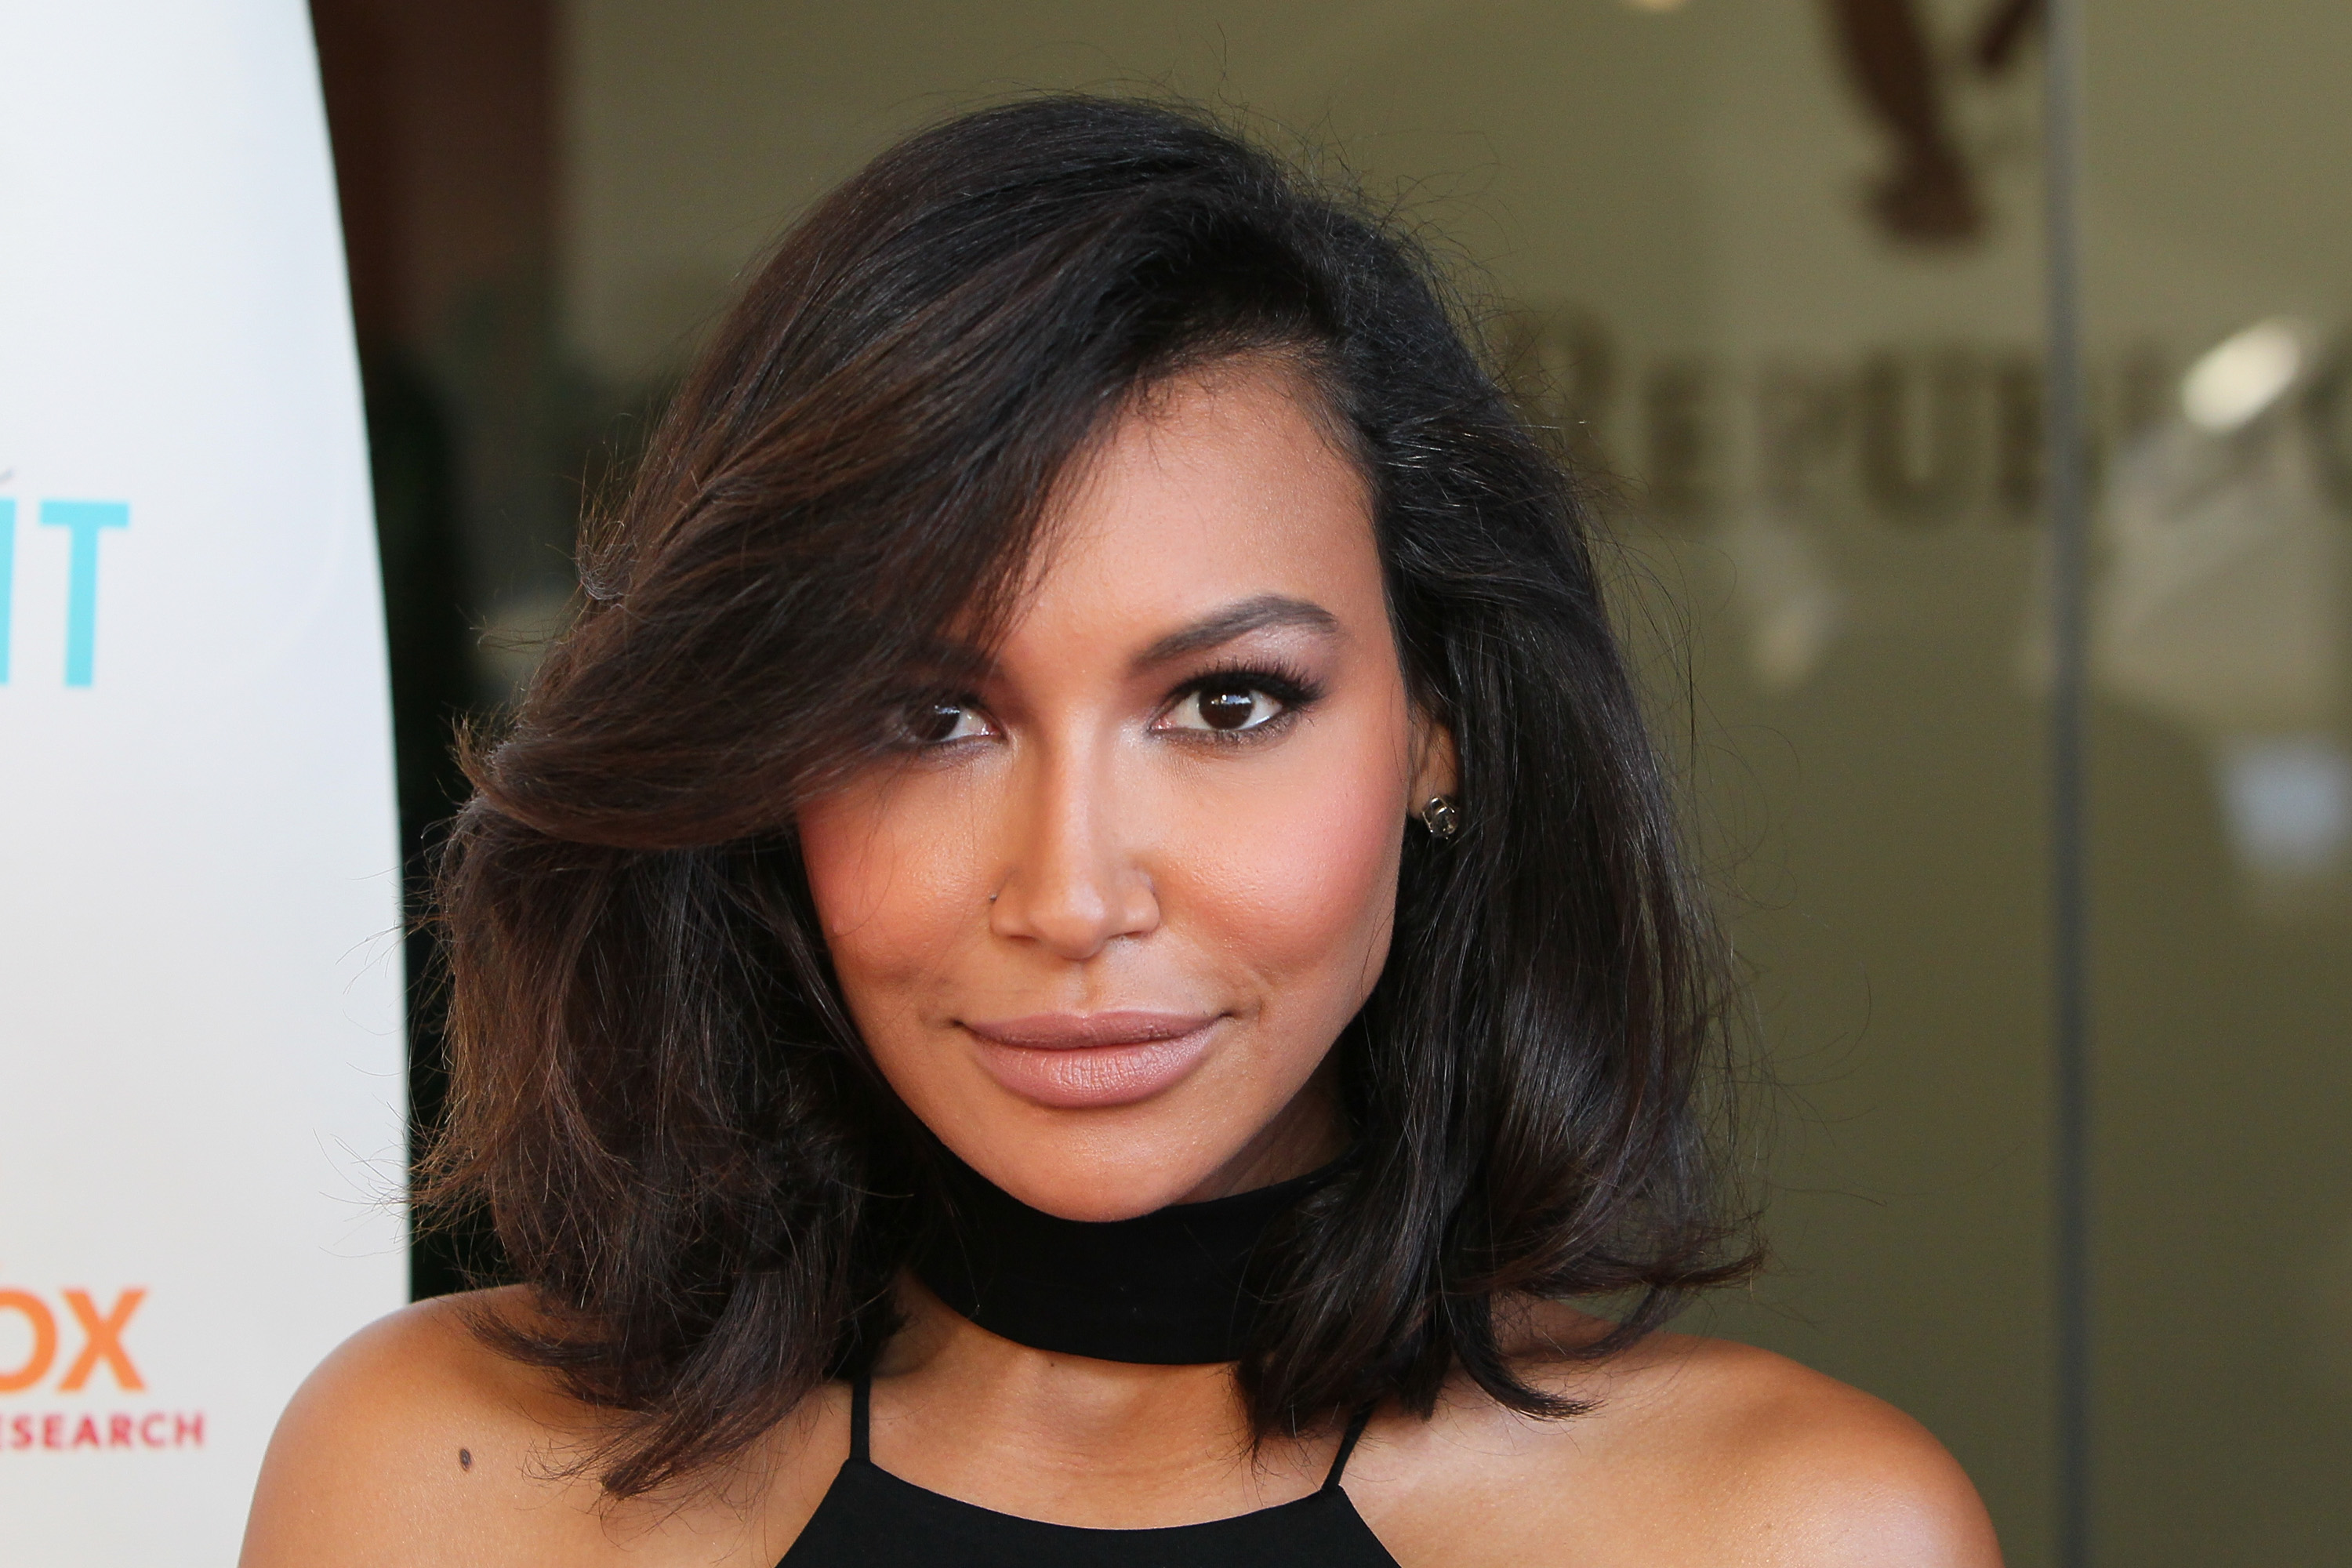 Naya Rivera arrives at Raising The Bar To End Parkinson's at Laurel Point on July 27, 2016 in Studio City, California.